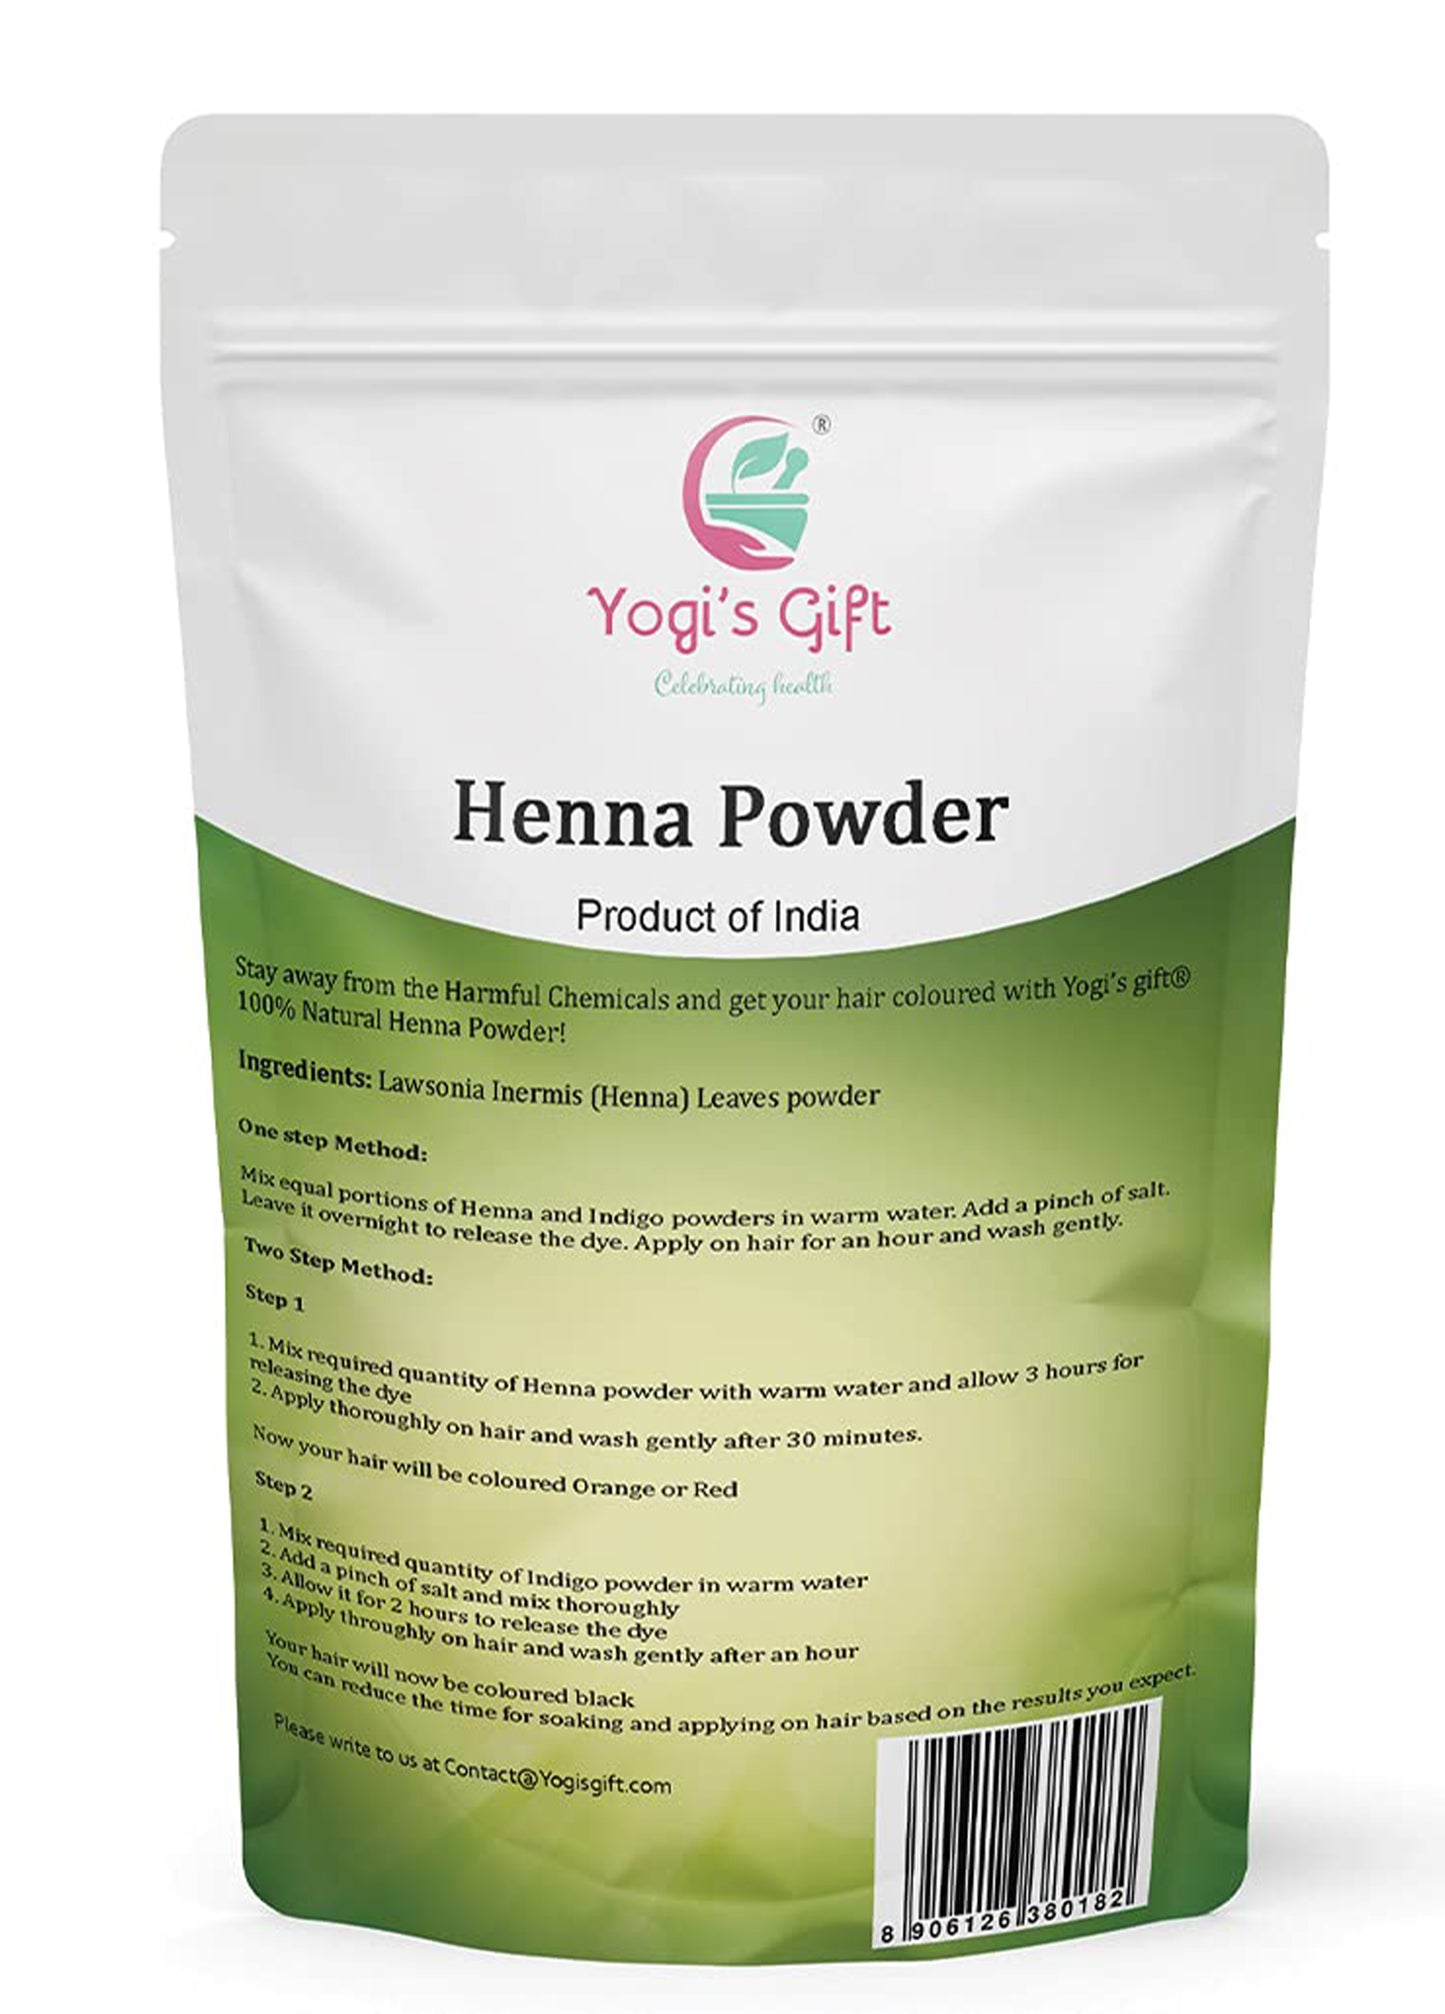 Triple Sifted Henna Powder For Hair | 2 Pound Bulk Pack | 100% Pure Henna Powder | Zero Chemicals, Best results | Yogi's Gift®